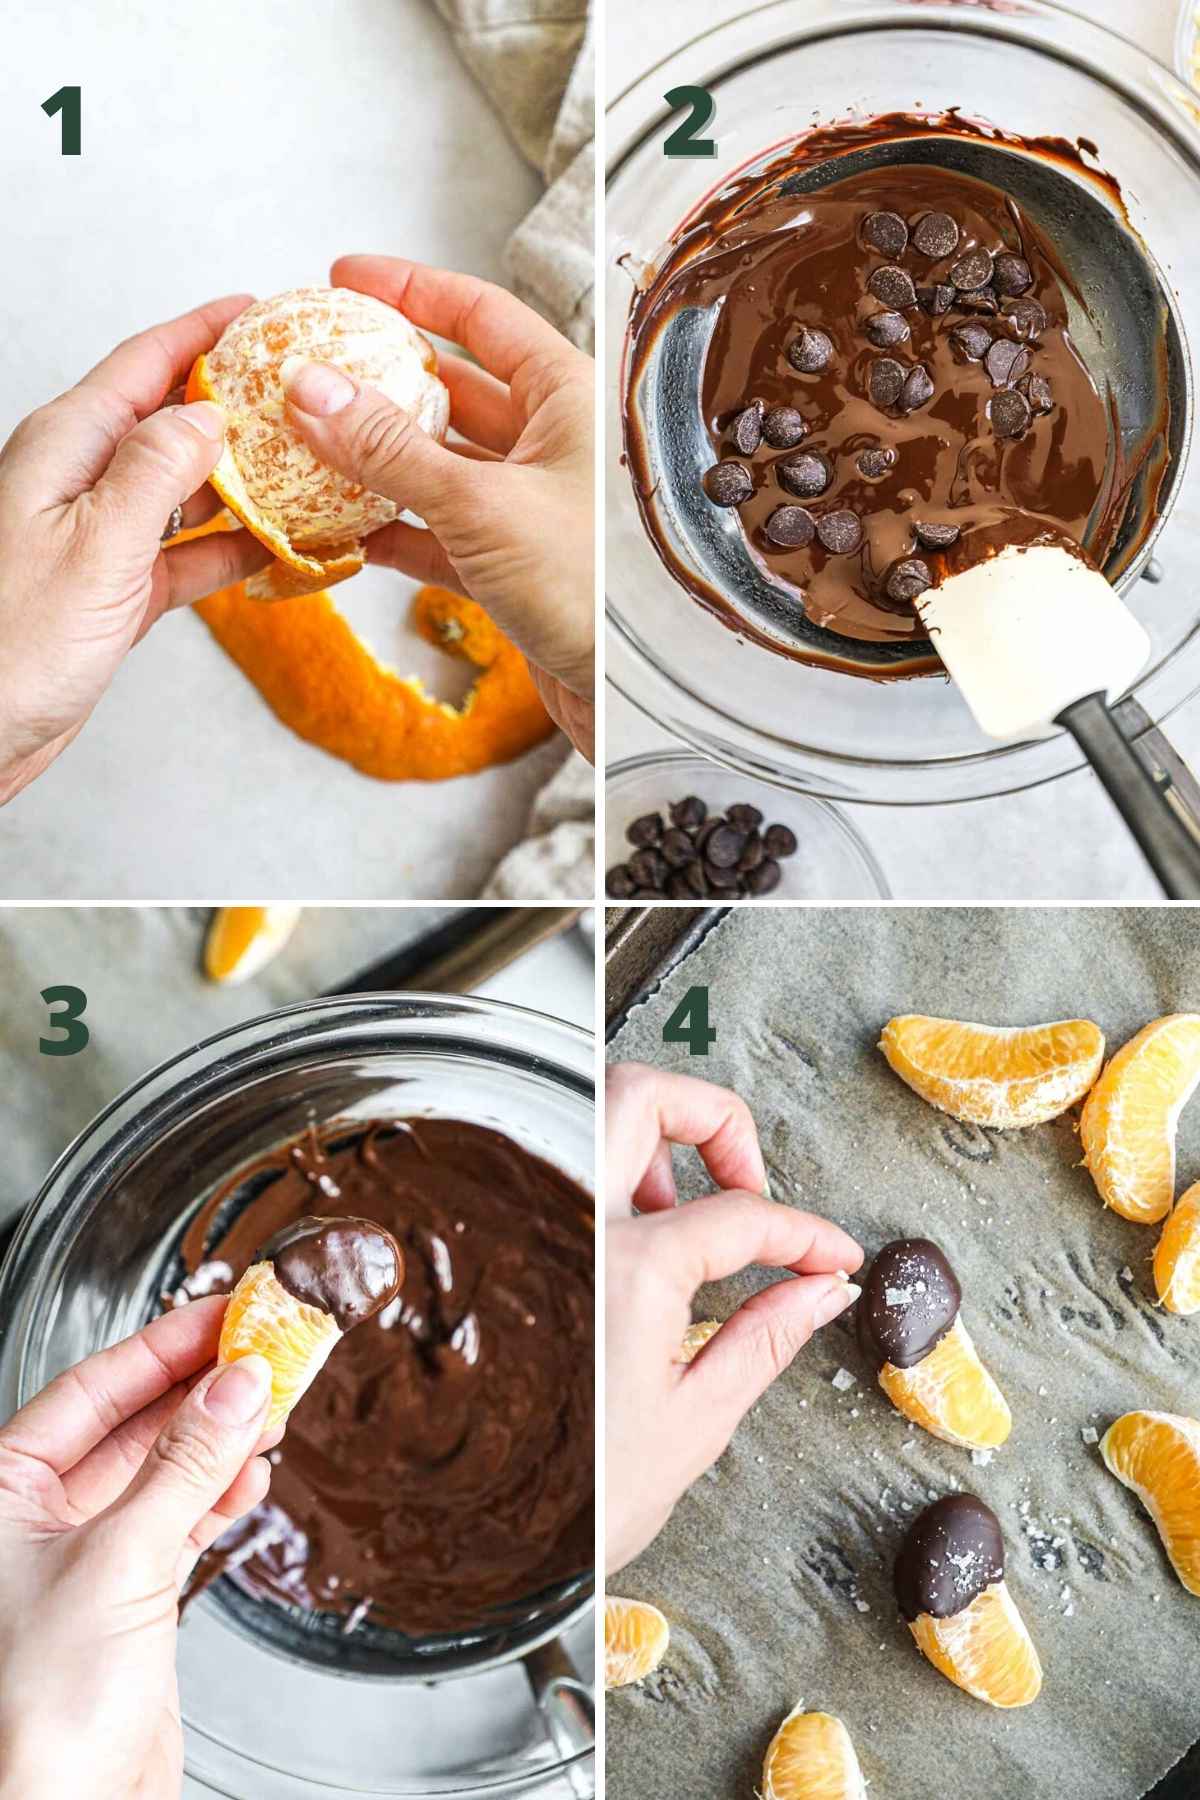 Steps to make chocolate-covered oranges, including breaking the oranges into segments, melting the chocolate, dipping the slices in chocolate, and adding flaky sea salt.